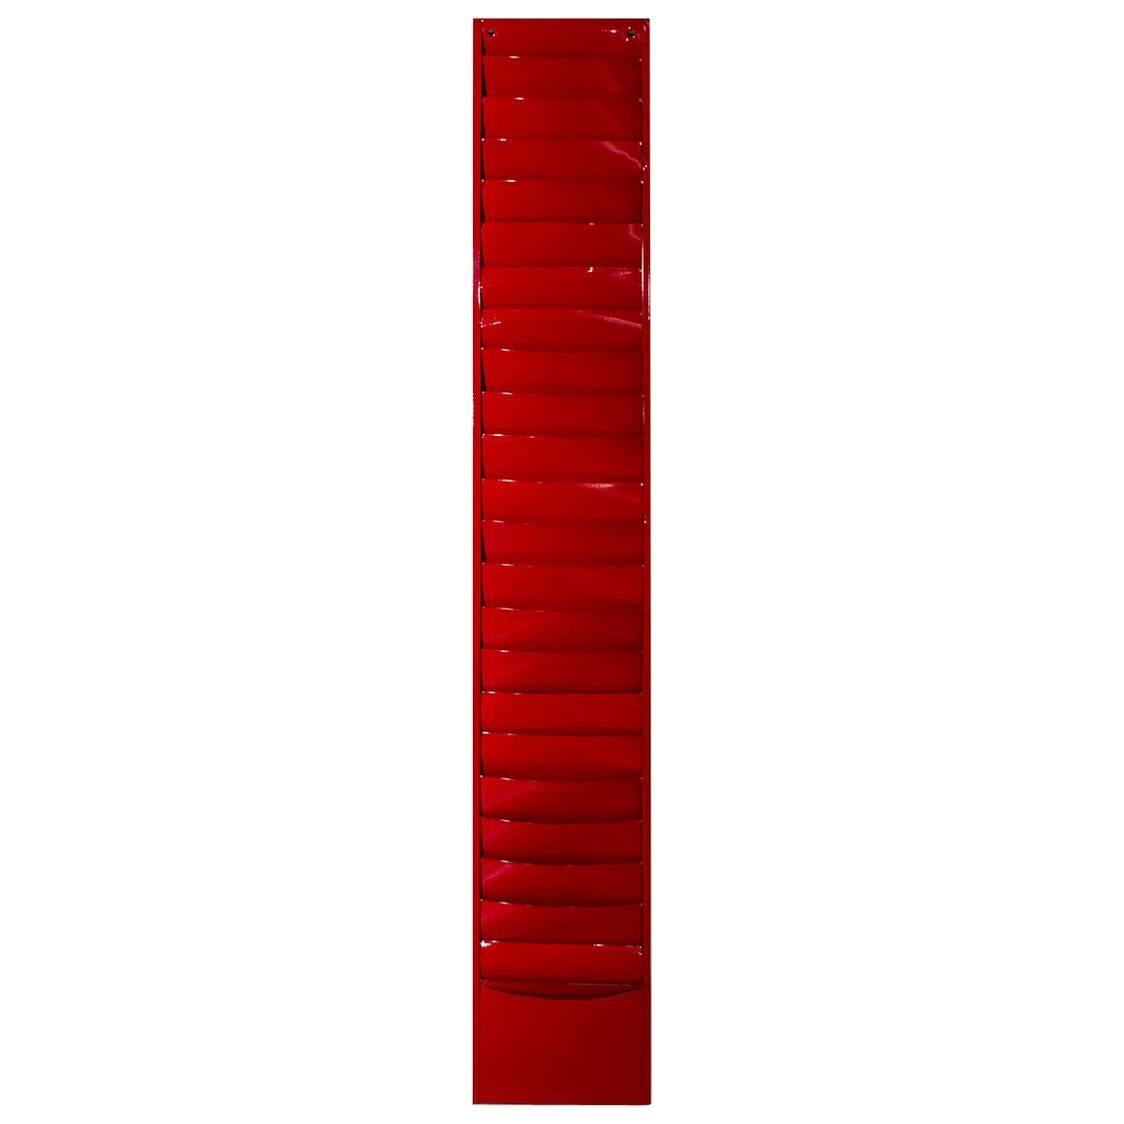 Extra Long Vintage File Holder in Gloss Red, circa 1960s